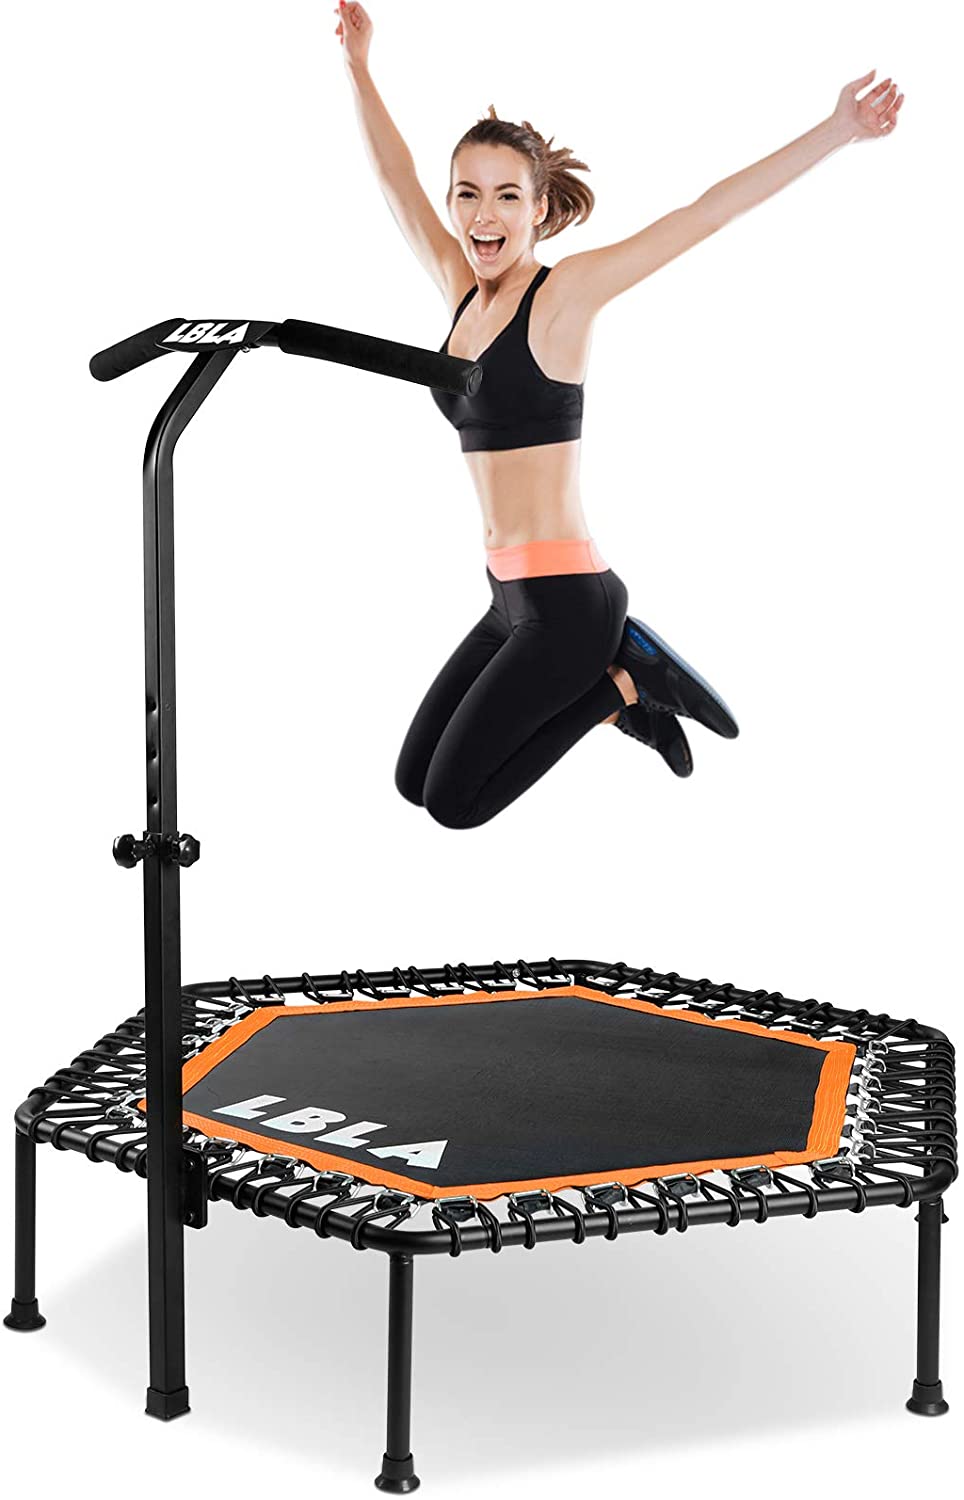 50″ Mini Trampoline,Fitness Trampoline with Adjustable Handle,Exercise Trampoline Rebounder for Kids Adults Suitable for Indoor and Outdoor Max Load 330lbs Featured Image